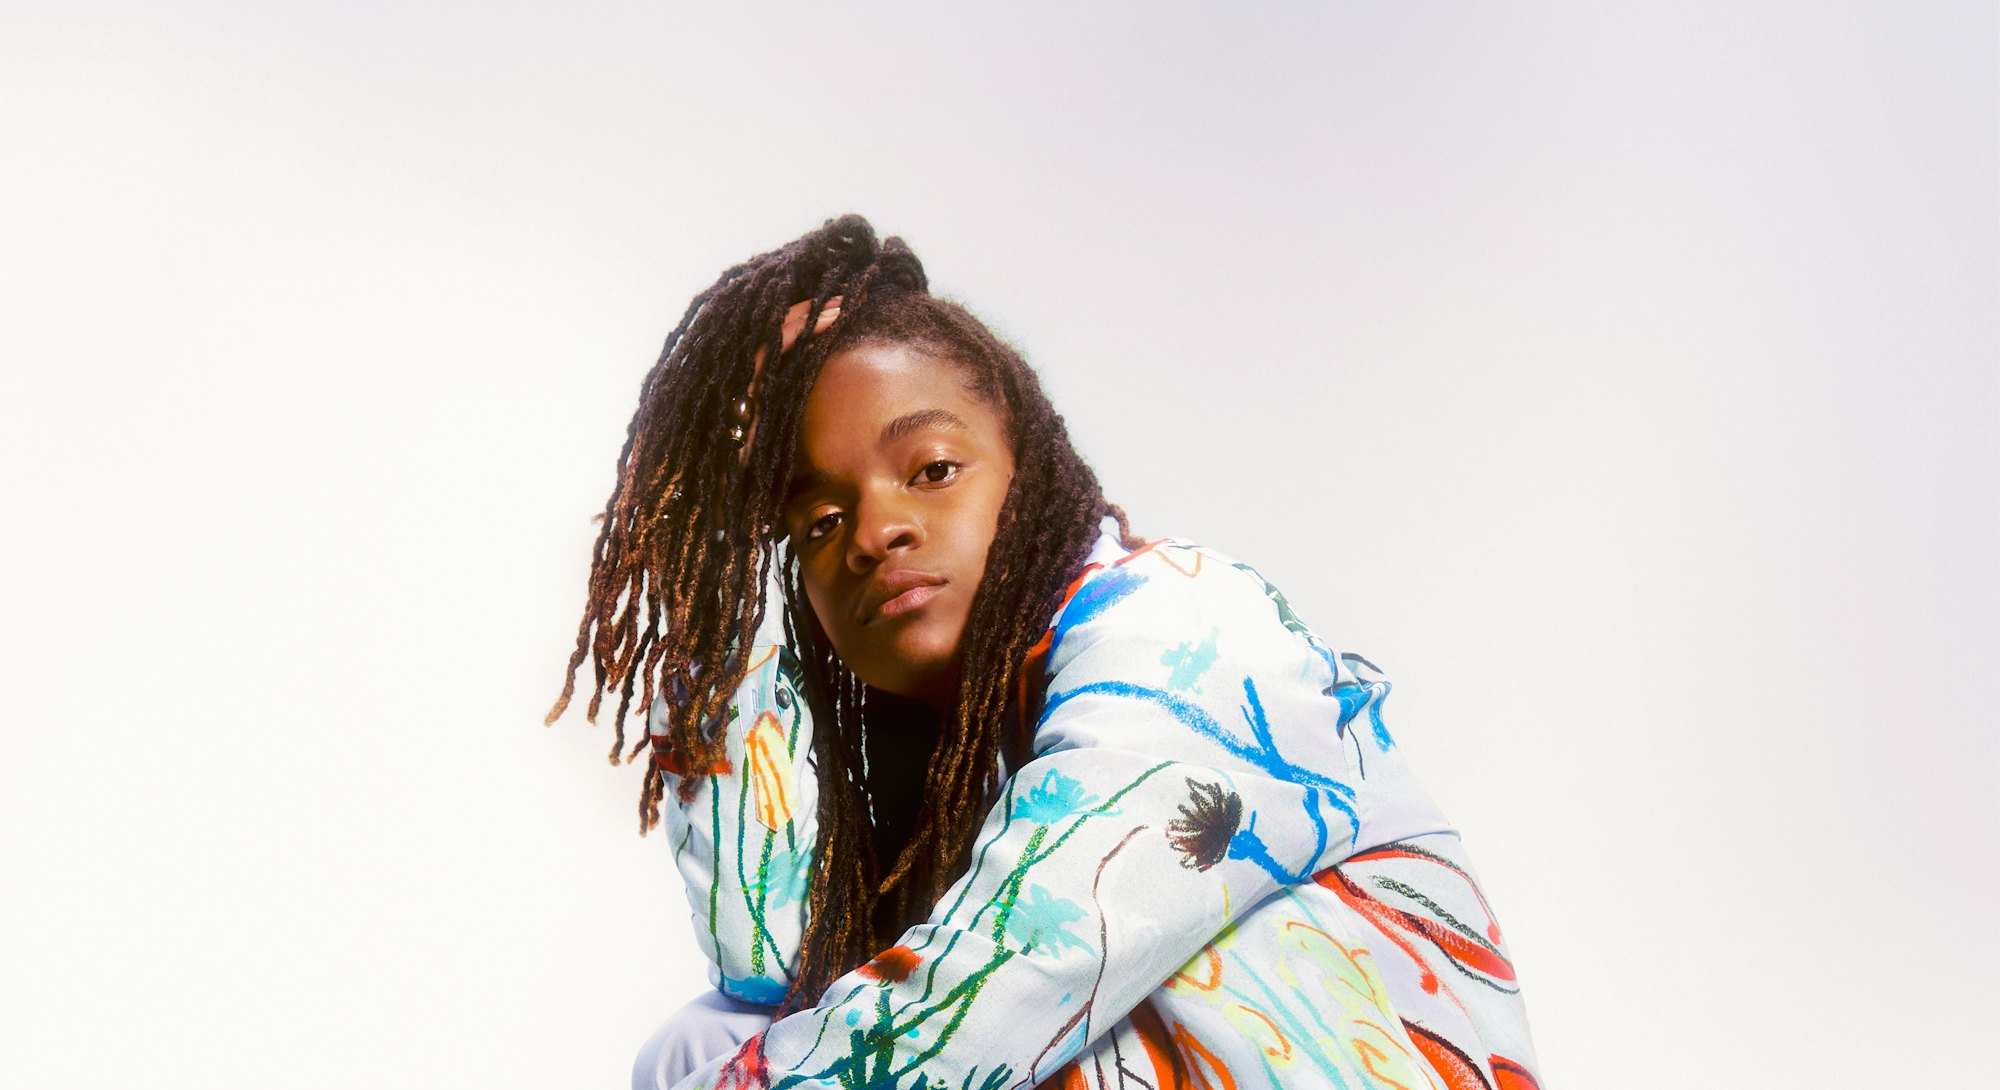 Reggae singer, songwriter, rapper, DJ and a guitarist Koffee posing in a colorful combination.